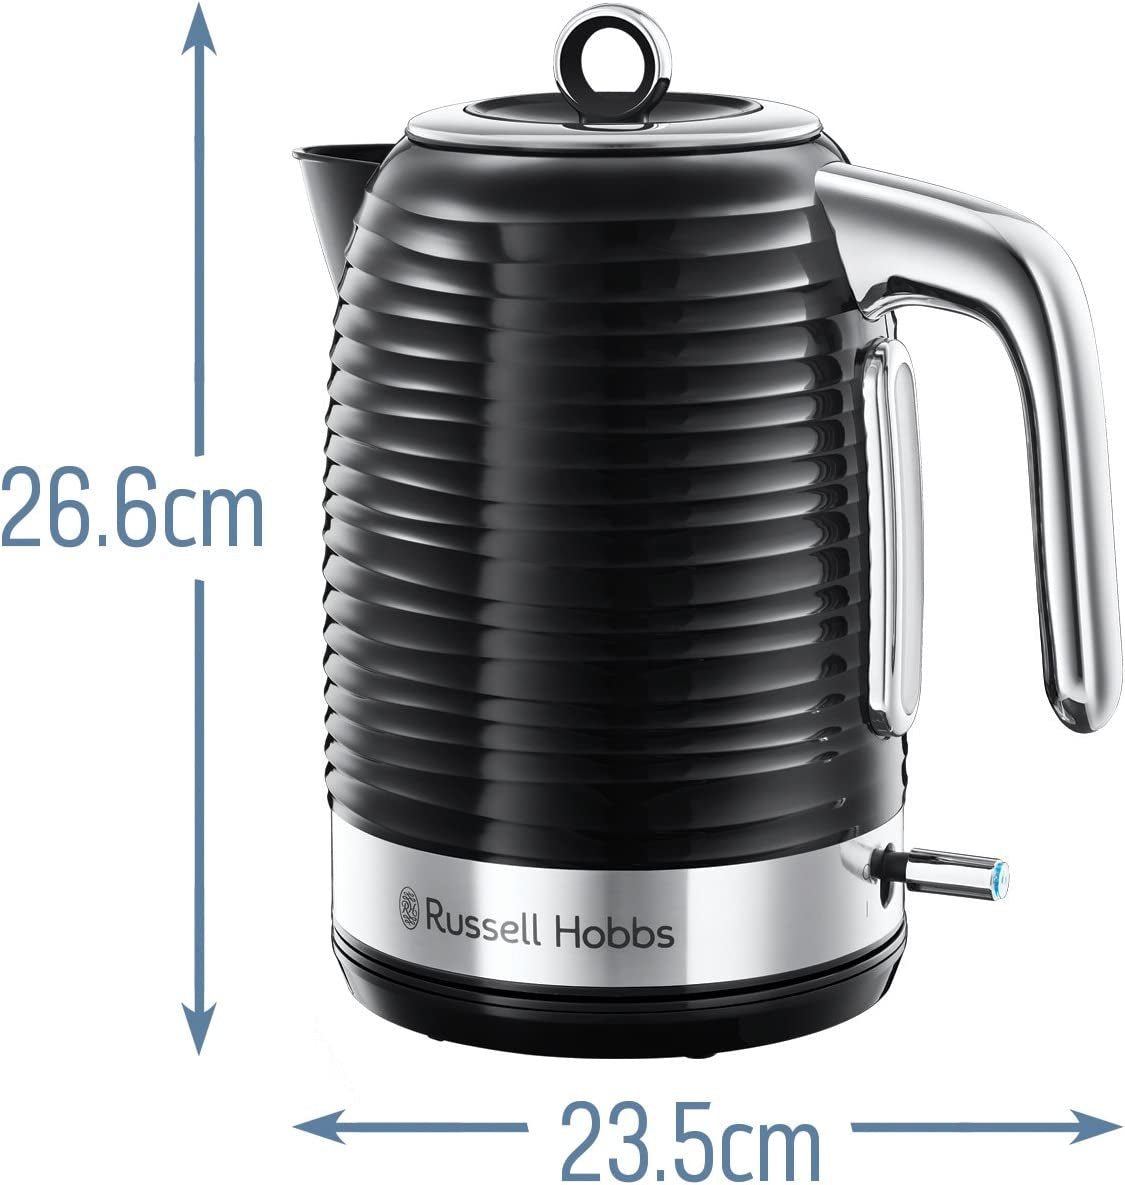 24361 Inspire Electric Fast Boil Kettle, 3000 W, 1.7 Litre, Black with Chrome Accents